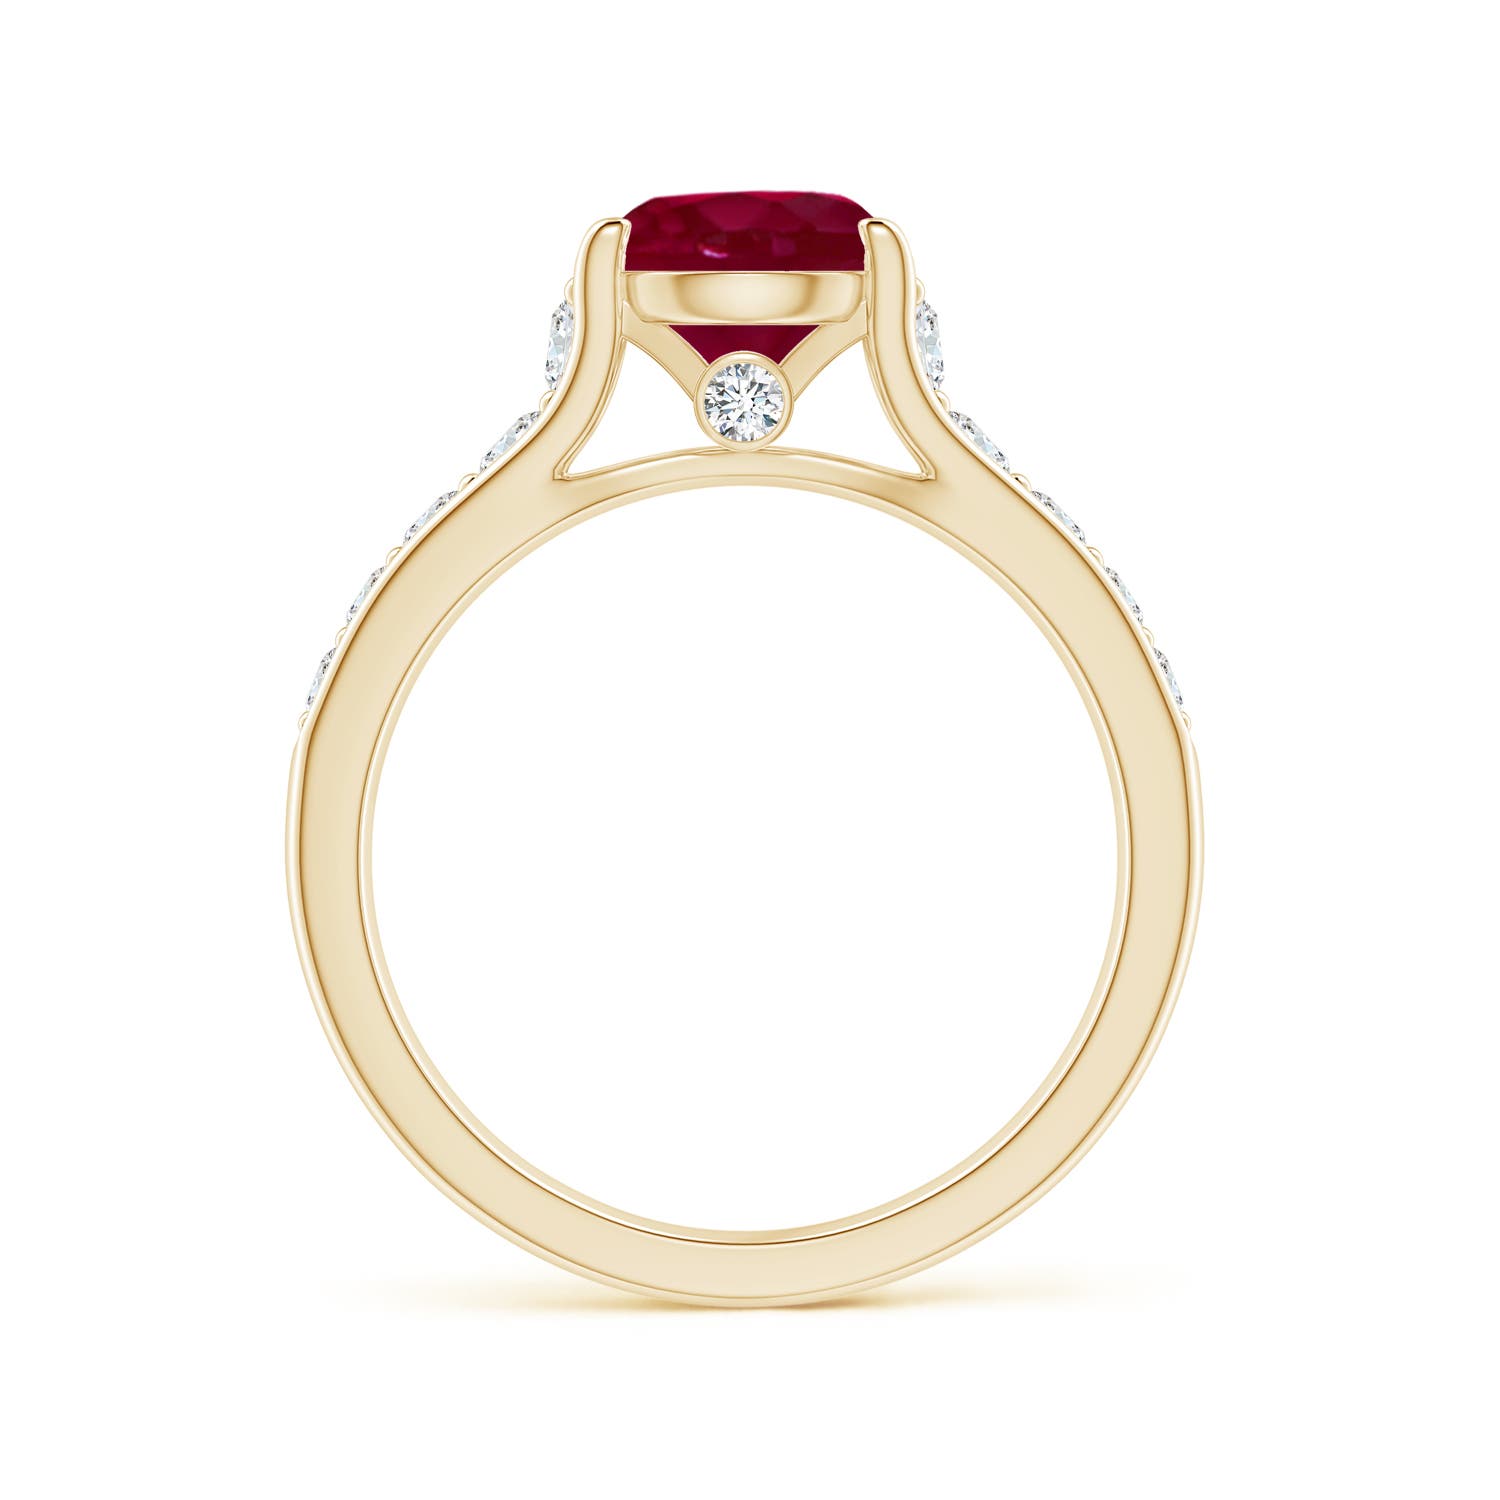 A - Ruby / 1.94 CT / 14 KT Yellow Gold